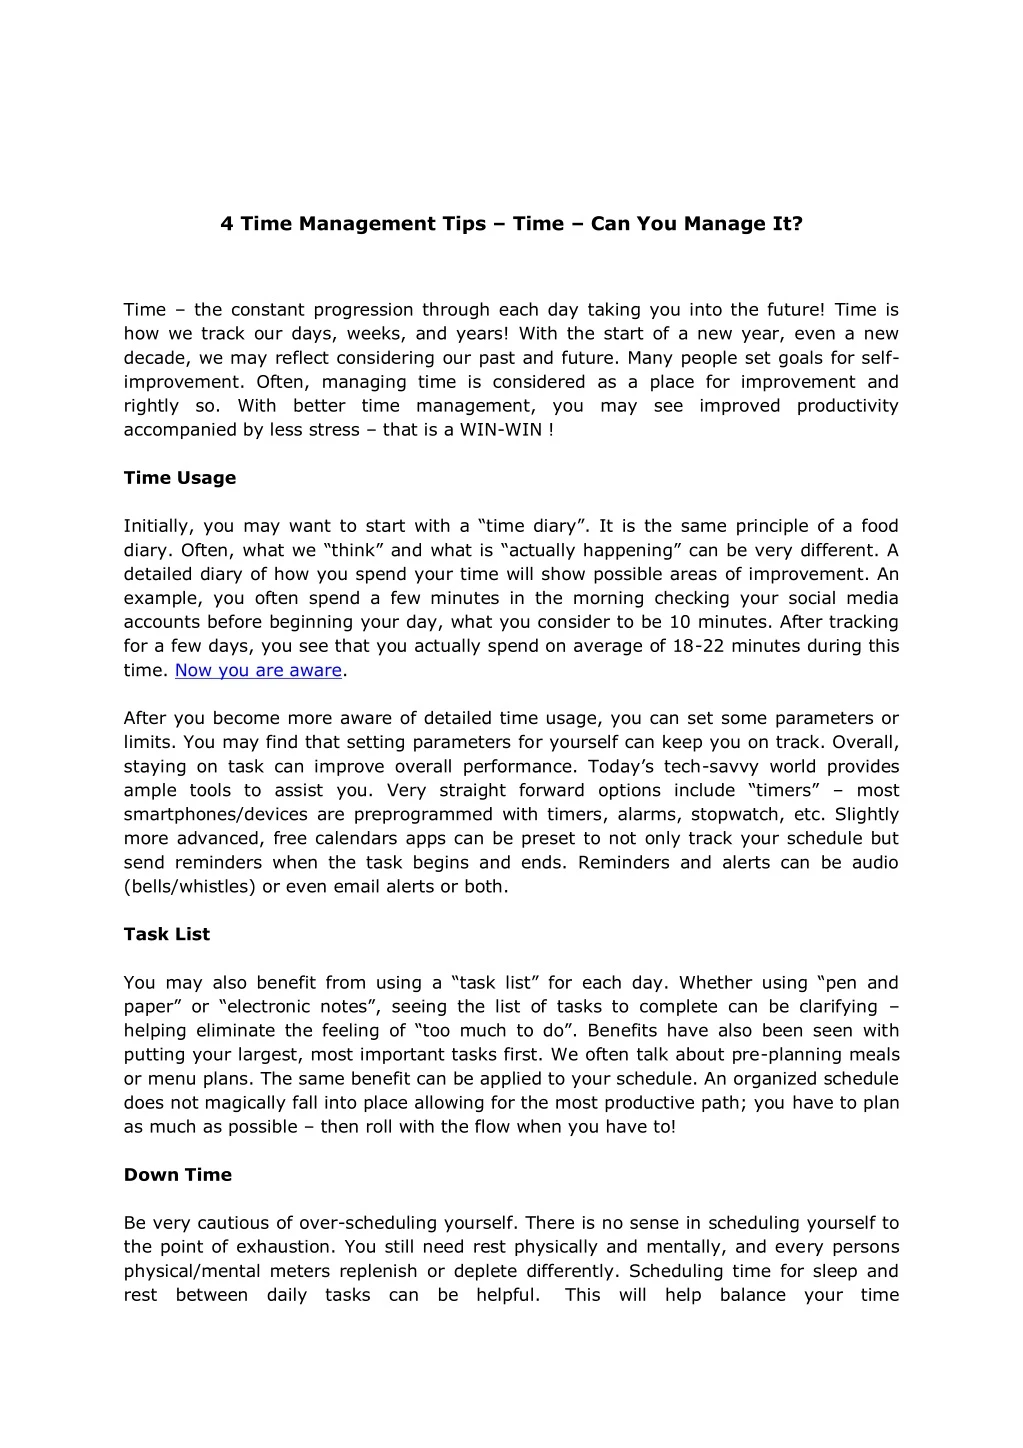 4 time management tips time can you manage it